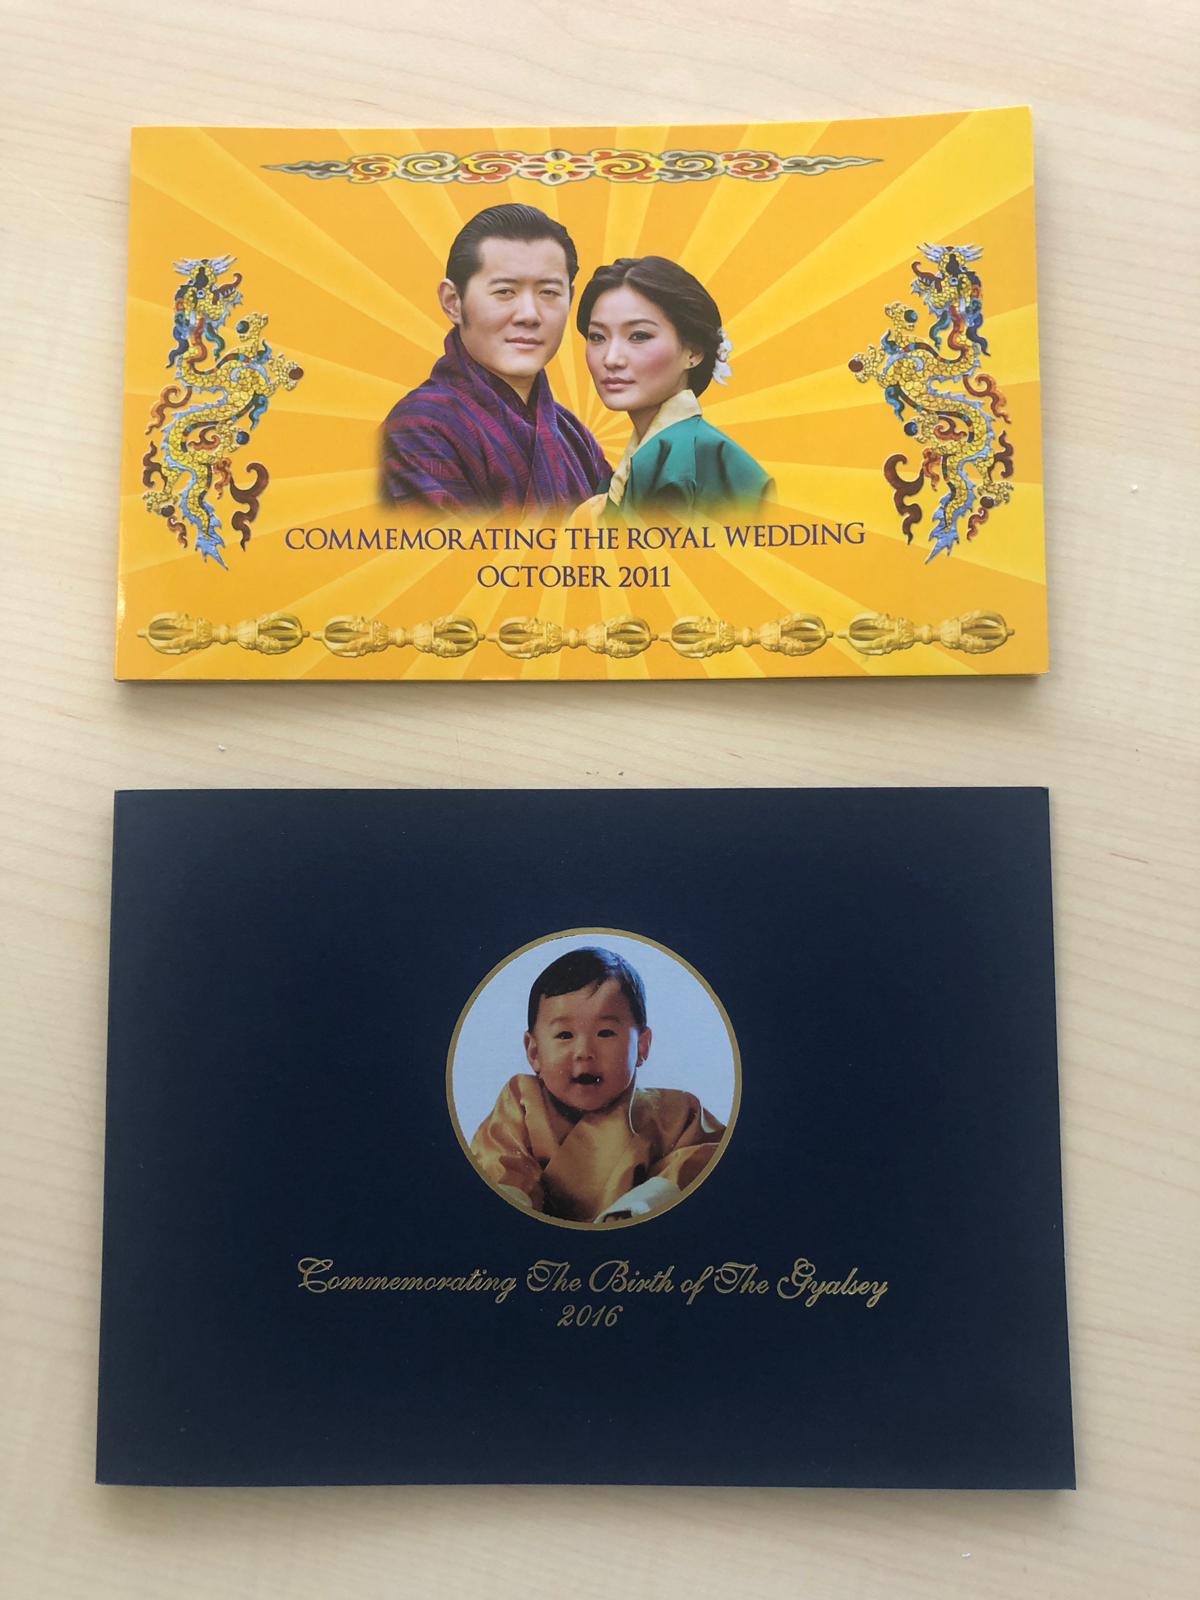 Inside look of commemorative notes issues by the Royal Monetary Authority